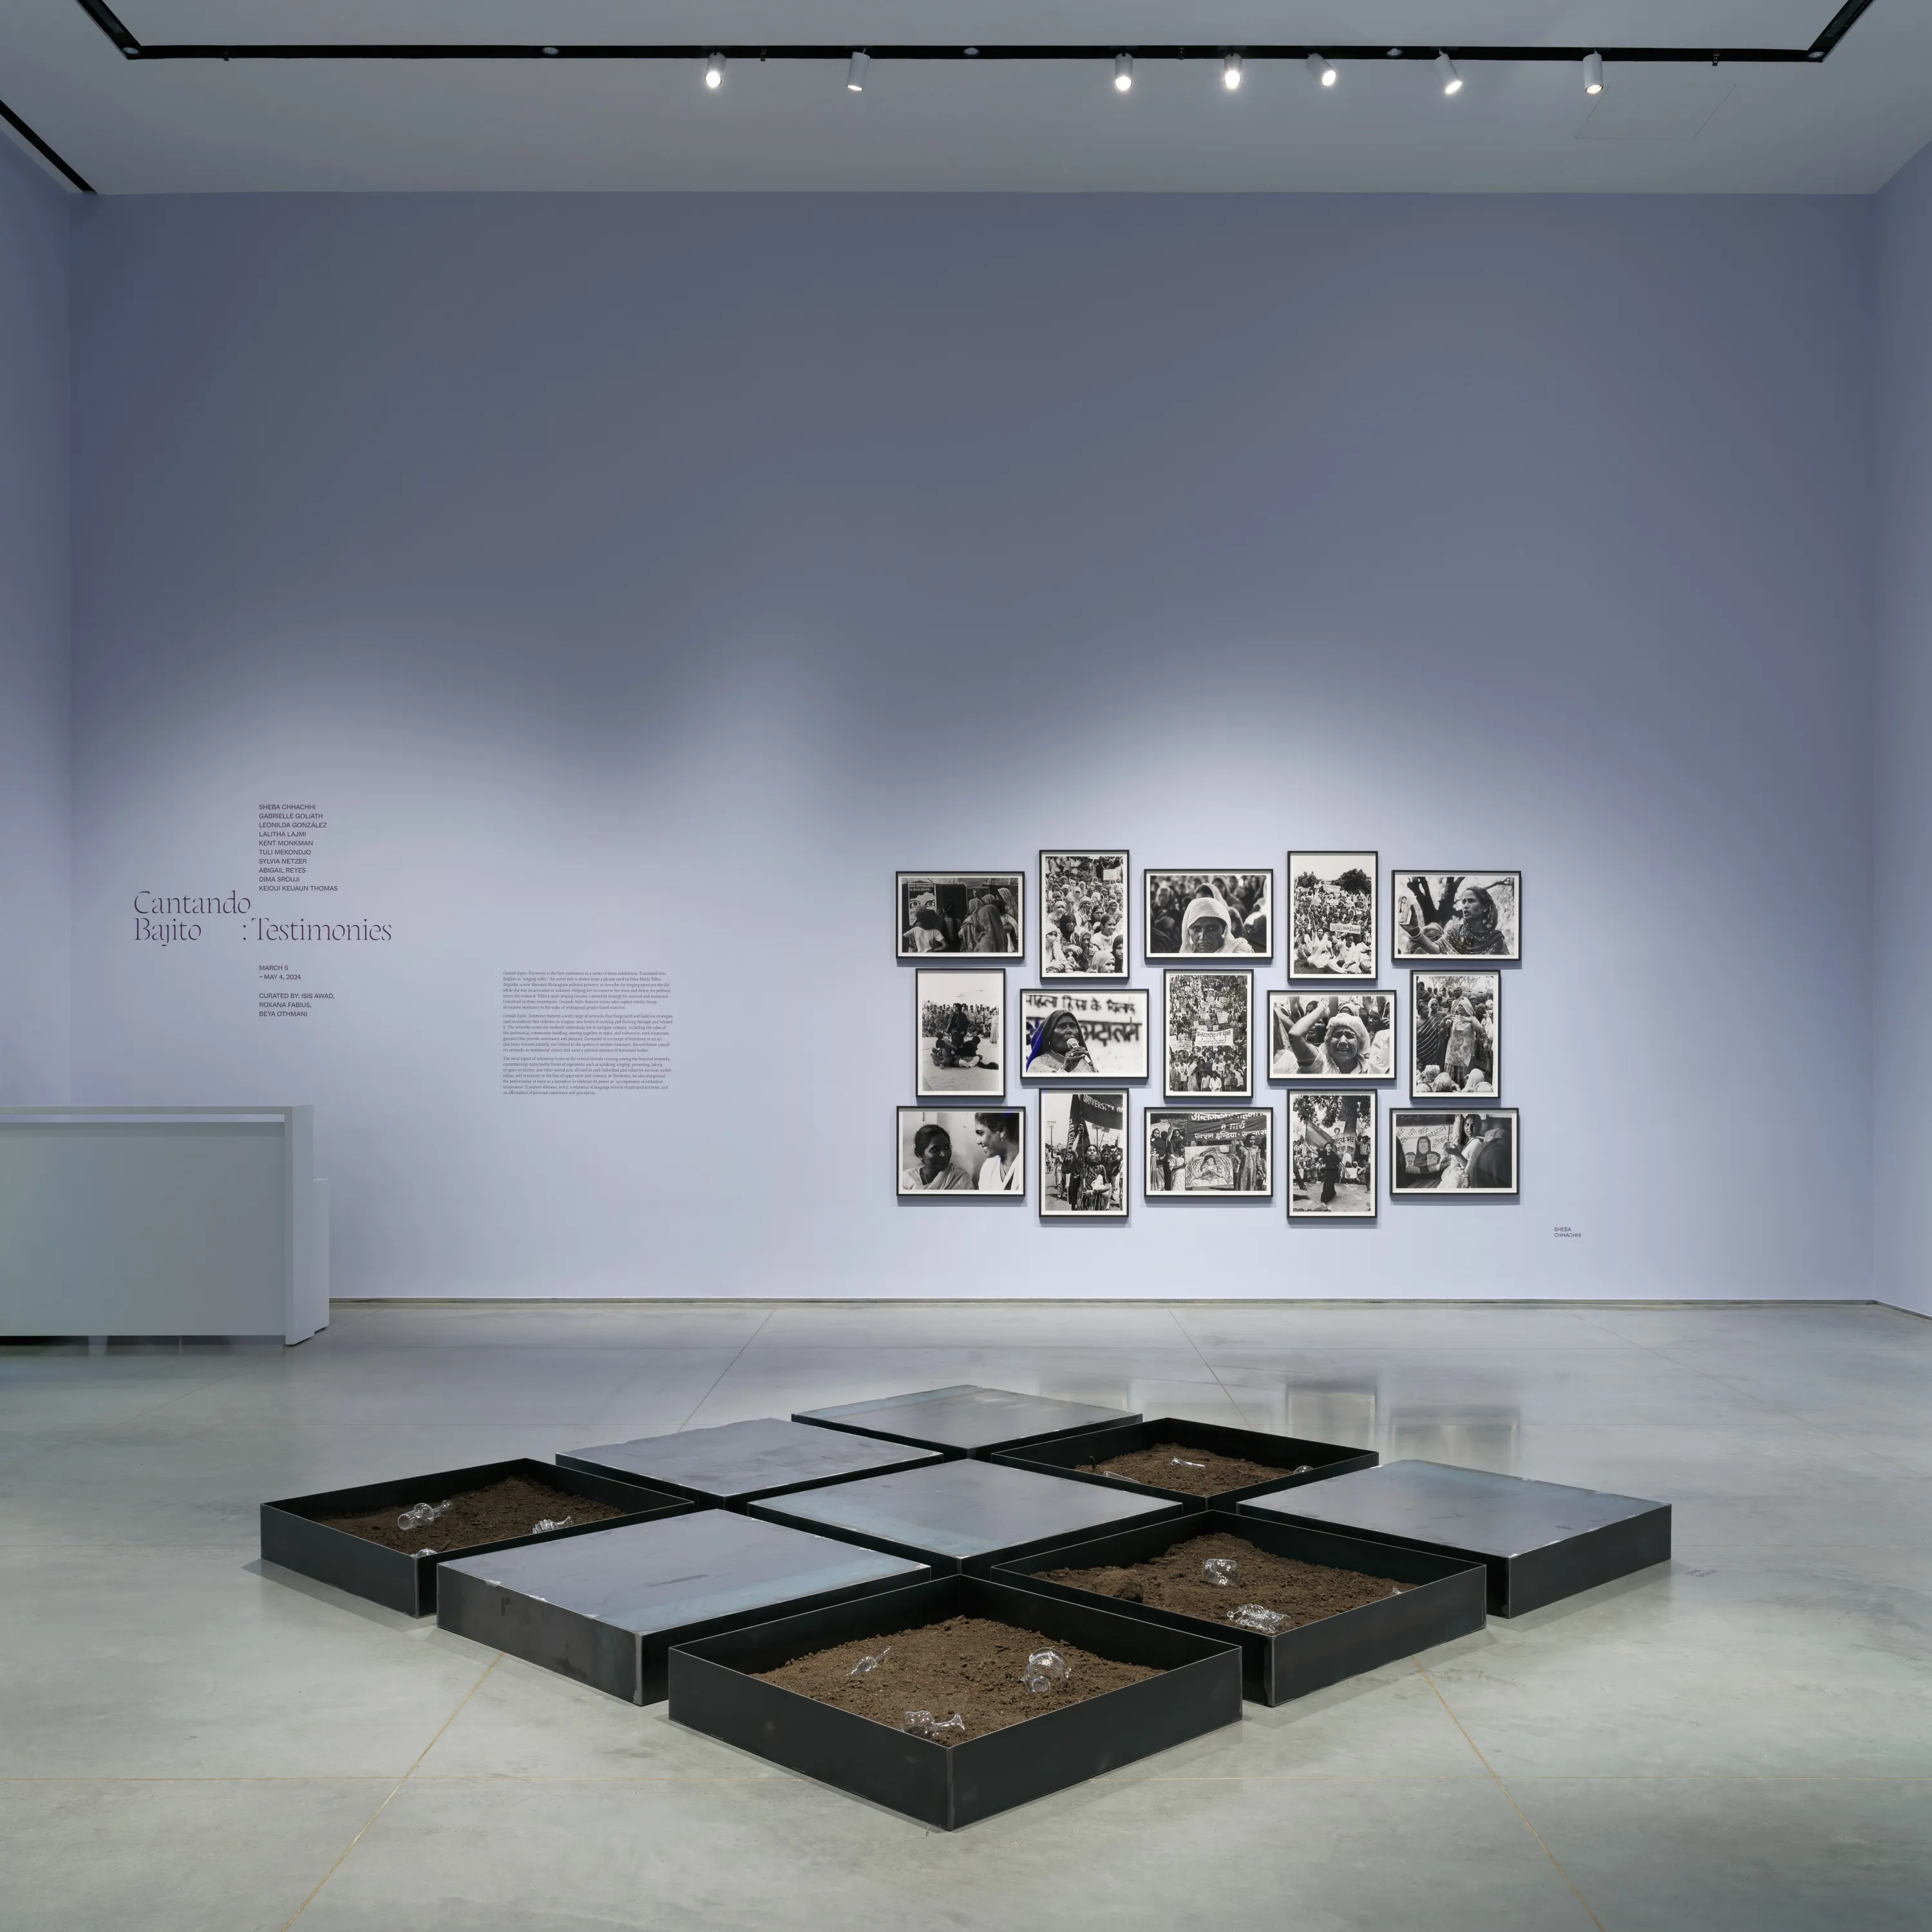 Gallery interior with light lavender walls and a gray floor. A three by three steel-tray installation sits in the middle of the floor. In the background above a white desk, the wall has text with header “Cantando Bajito: Testimonies”. To the right is an arrangement of fifteen framed black and white photographs.